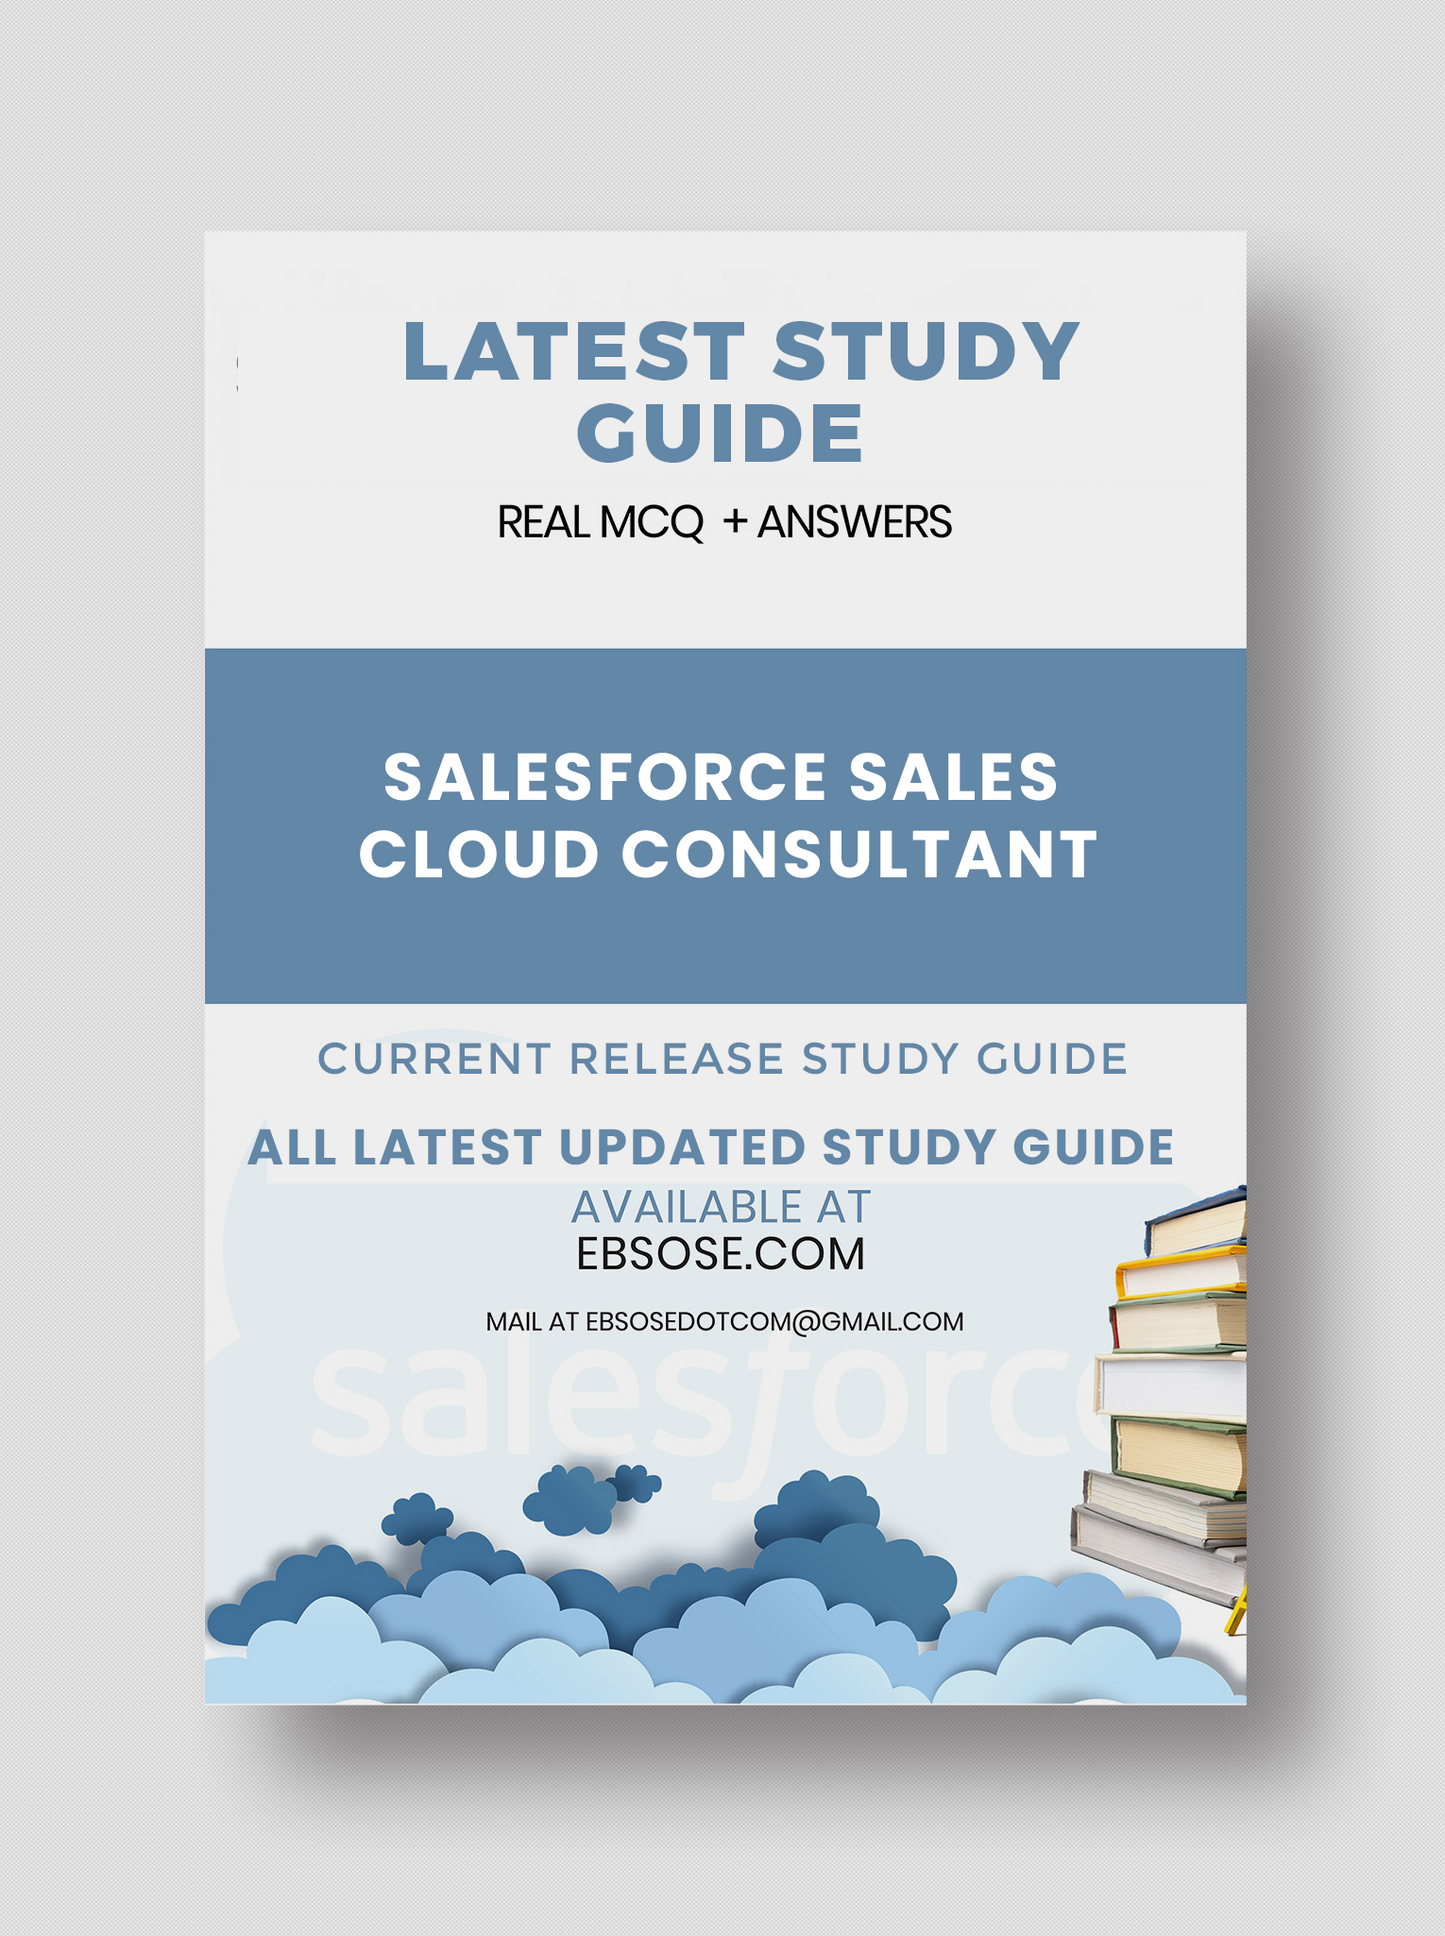 Salesforce Sales Cloud Consultant - Winter 24 study Guide